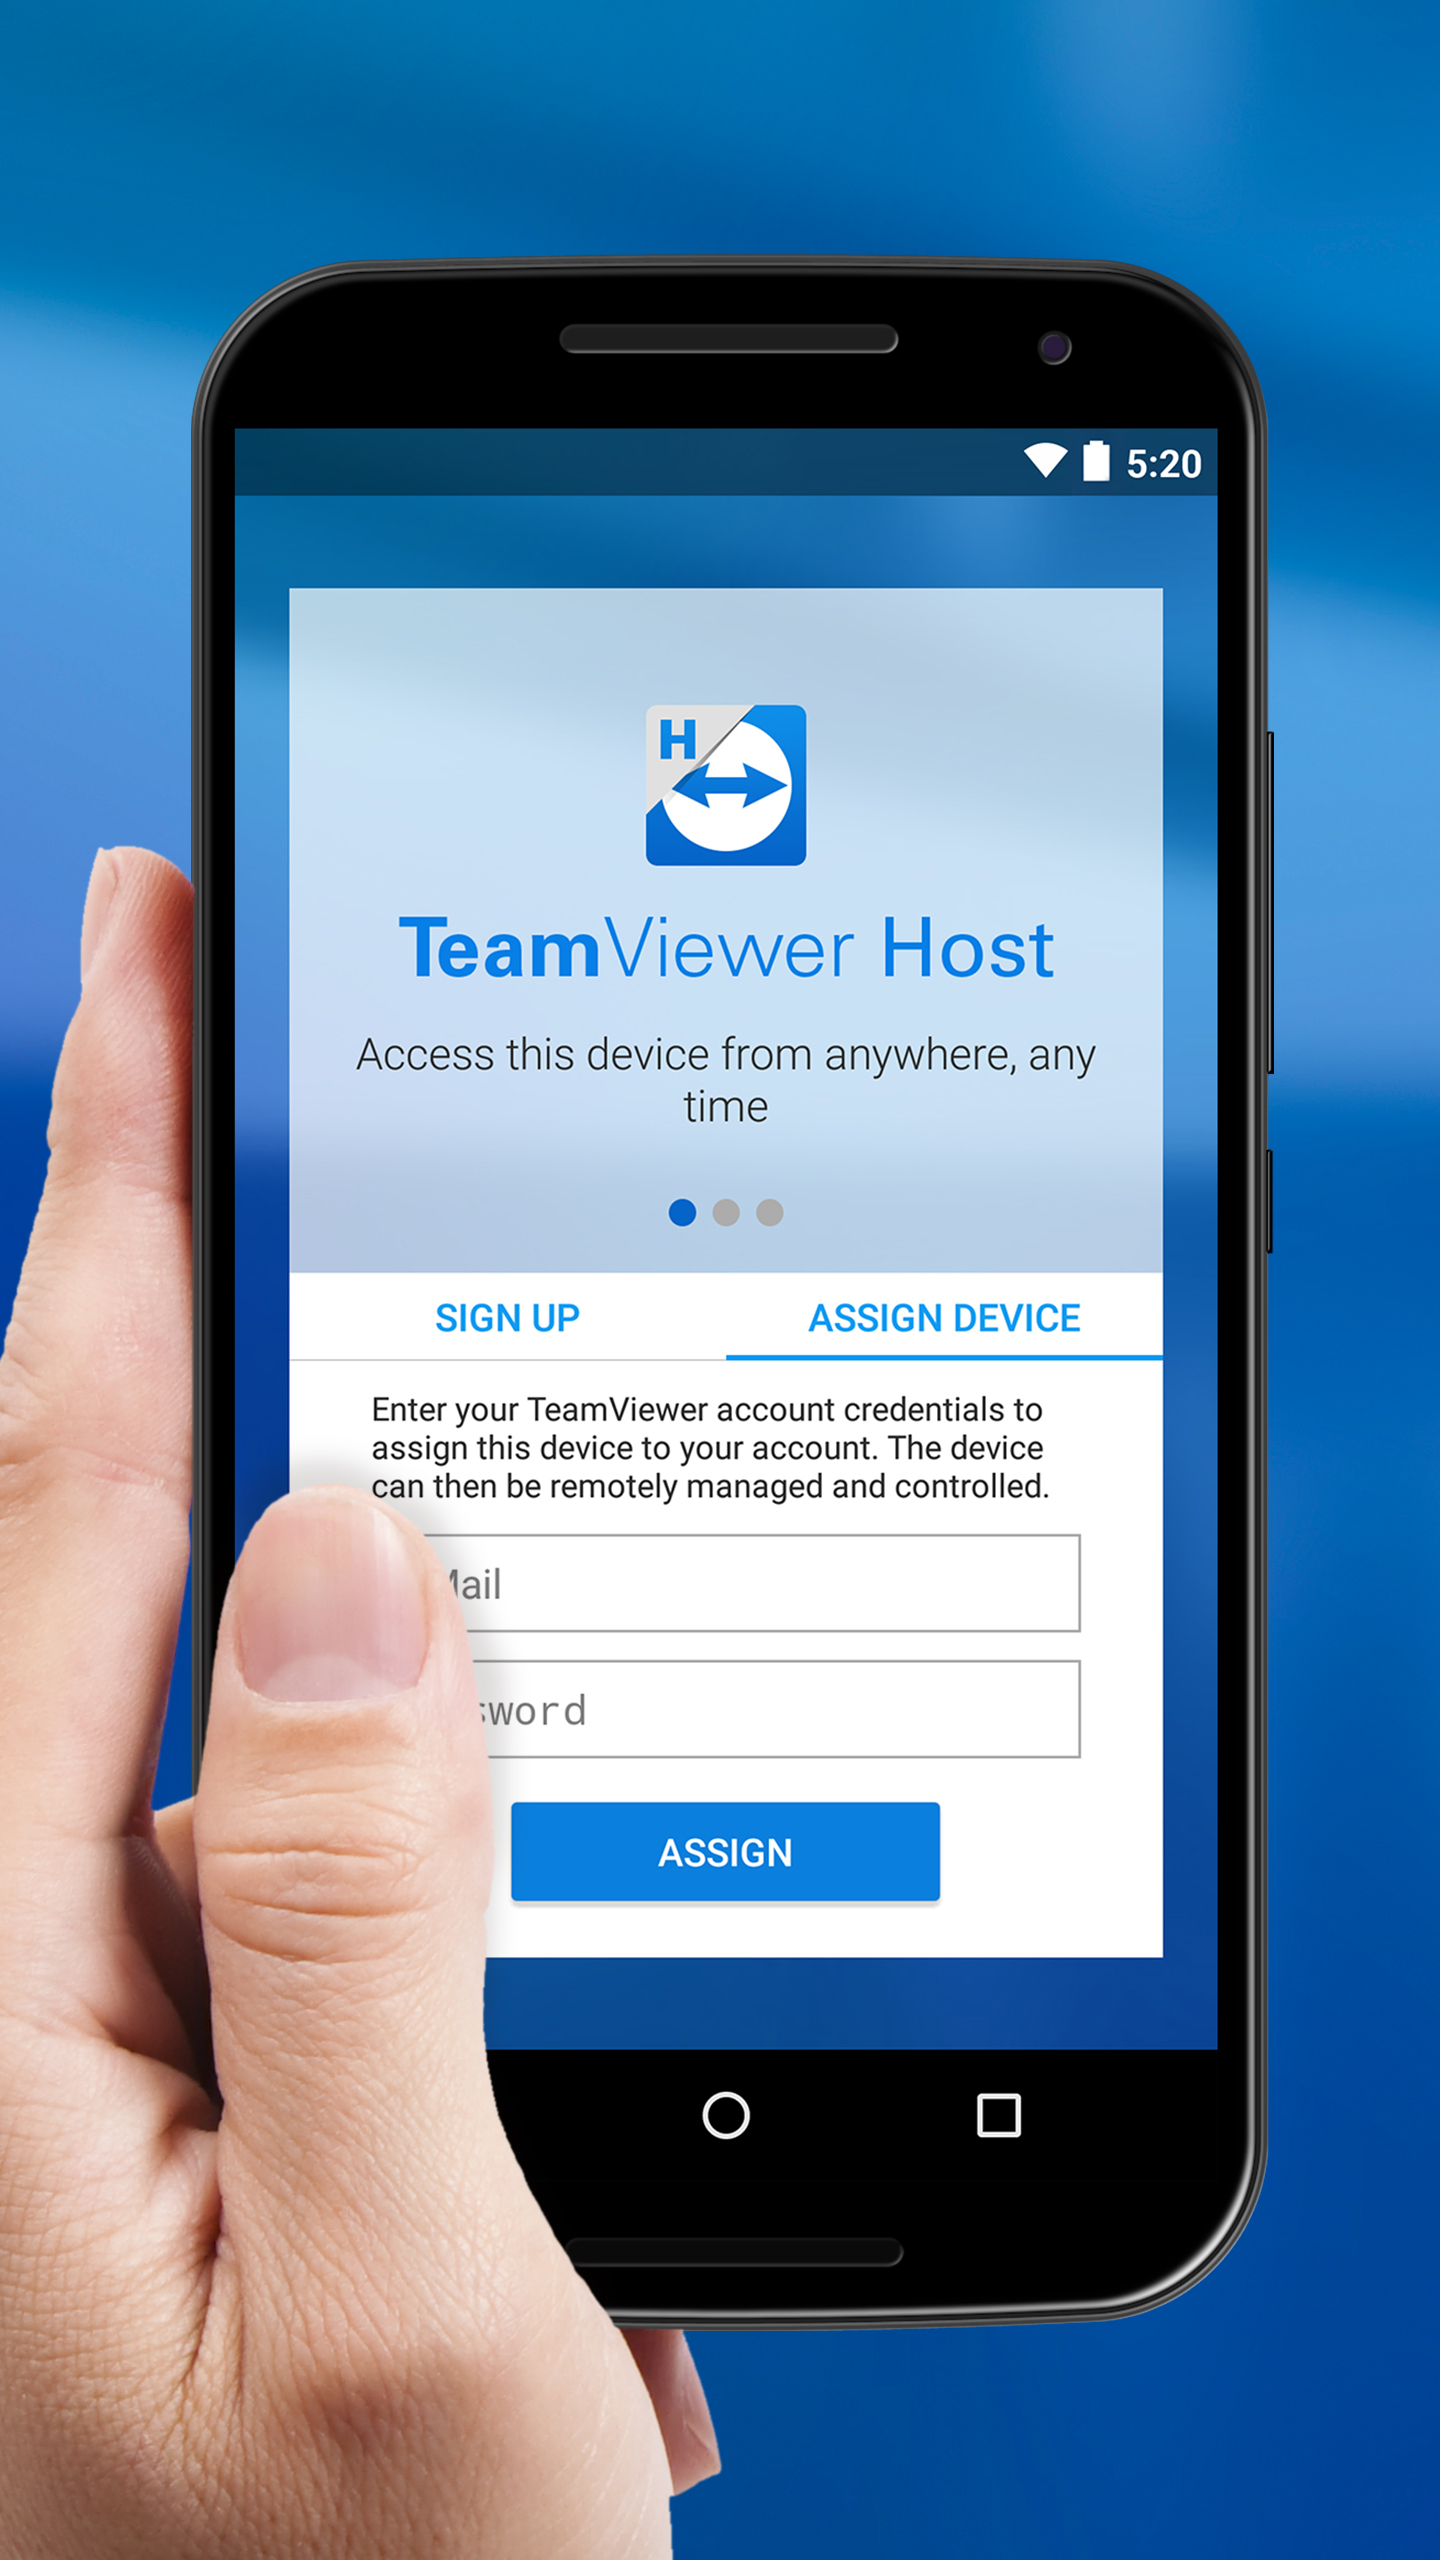 teamviewer host unattended access